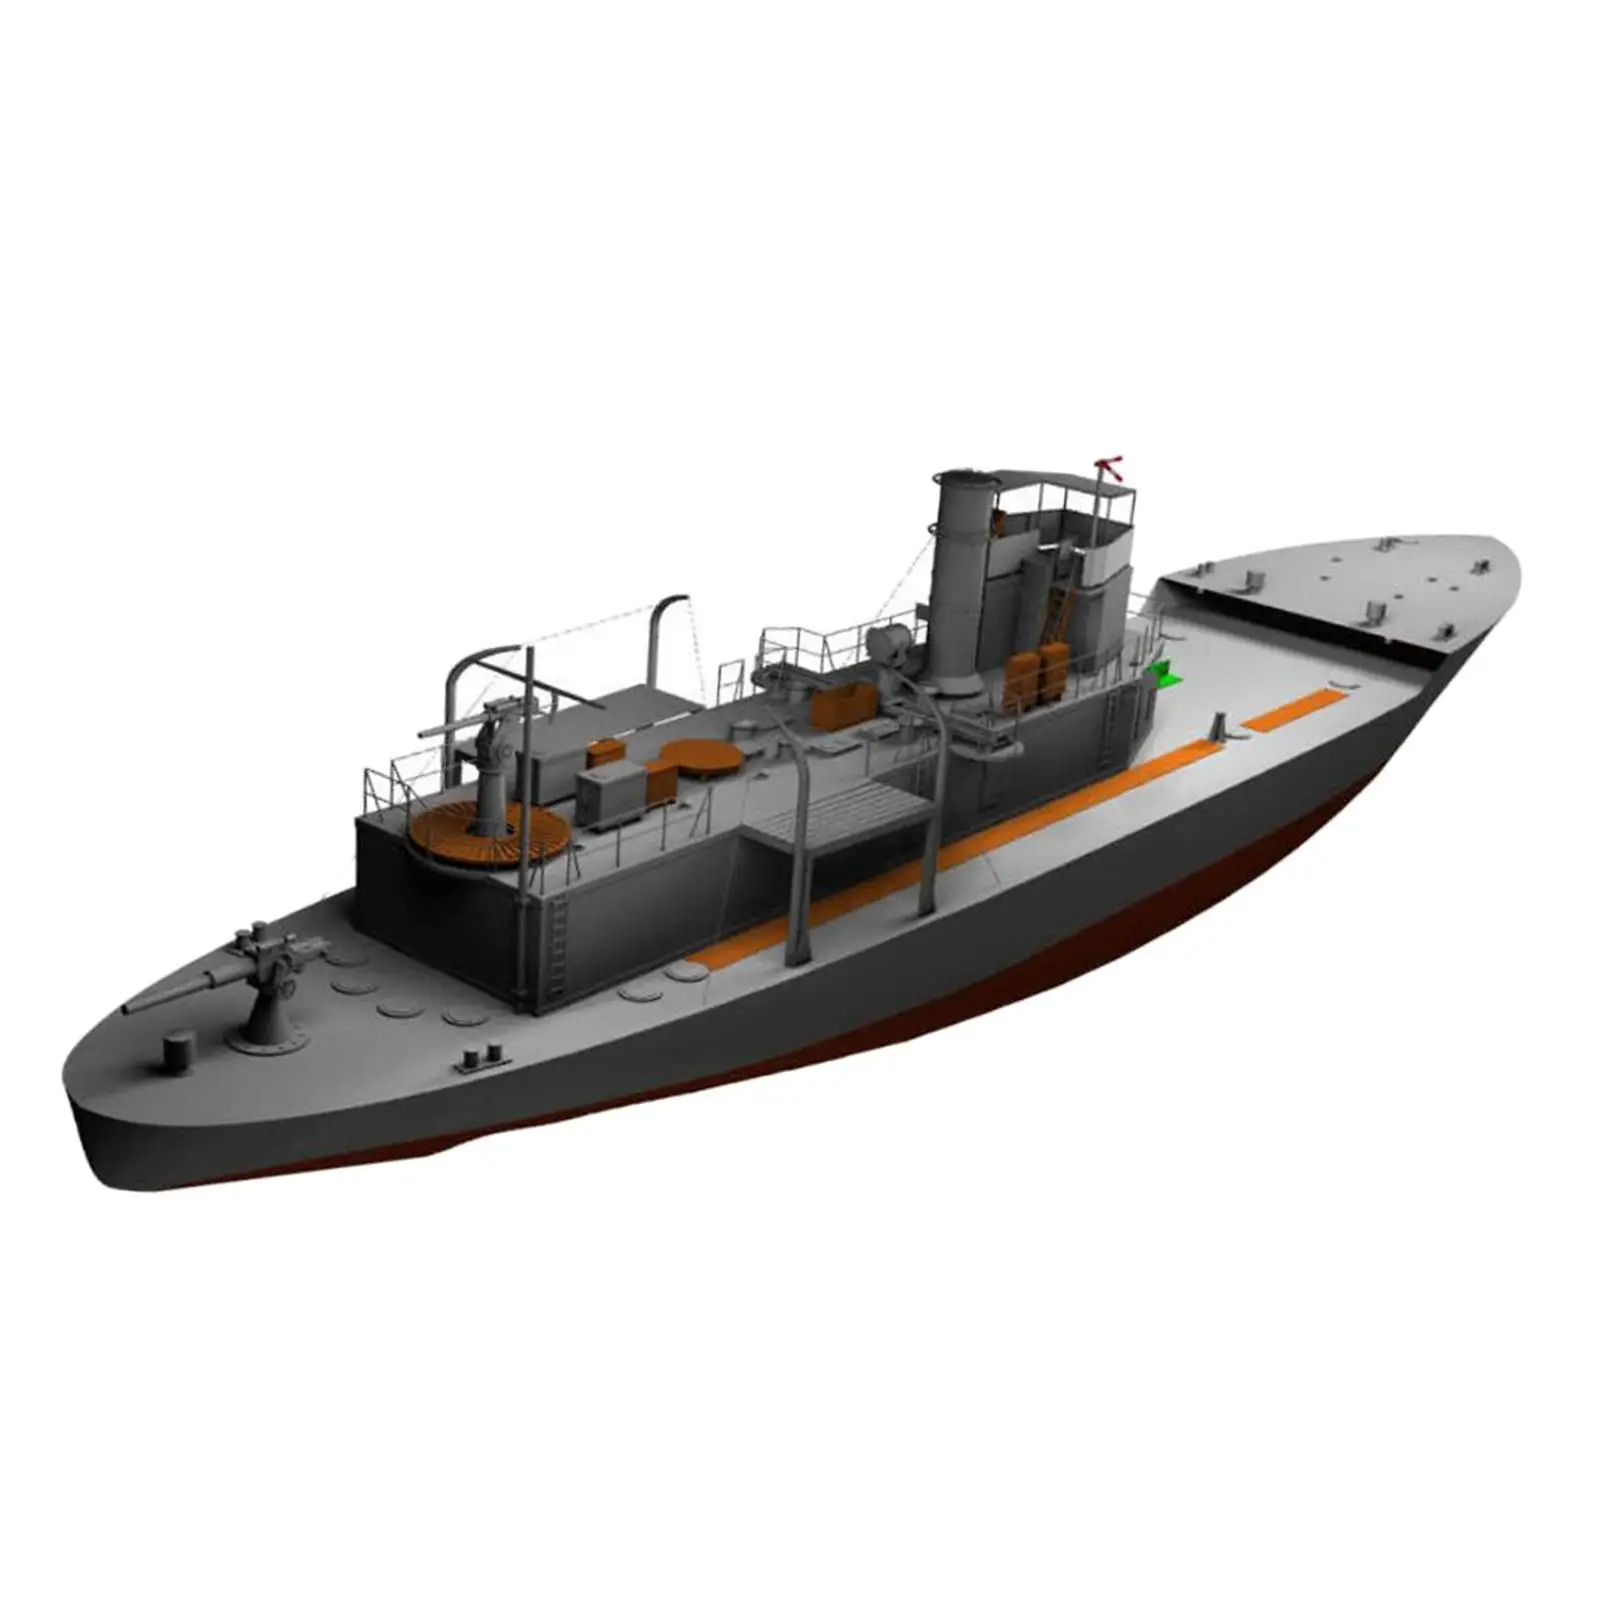 Patrol Boat Scale Model DIY Paper Ship Ship and Boat Jigsaw Puzzles 1/100 for Home Decoration Children Desktop Ornaments Gift